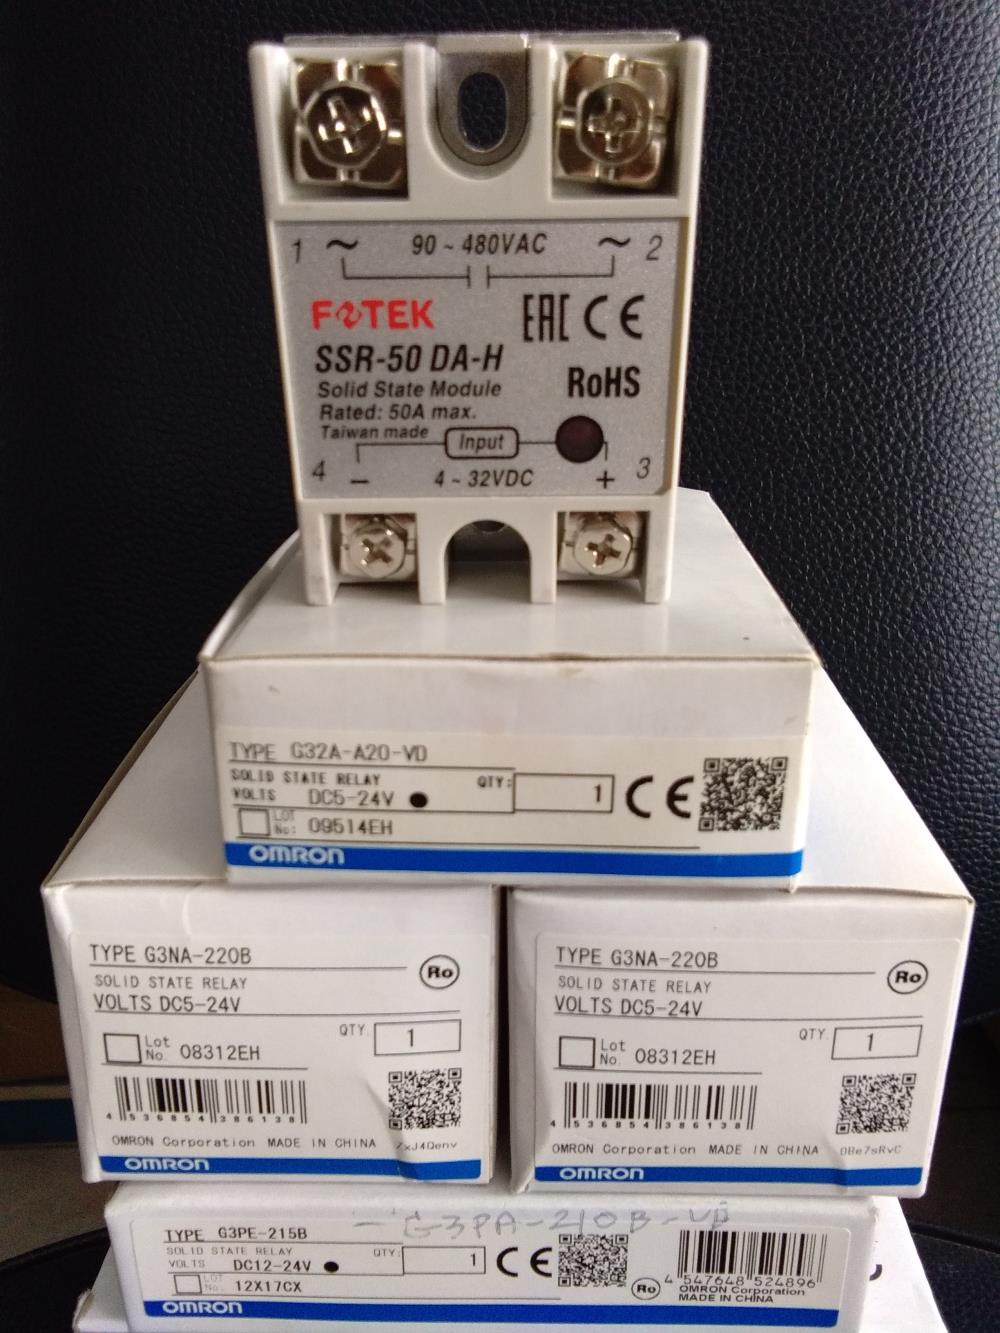 OMRON : FOTEK : Solid state relay  G3PE G3PA G3NA G32A SSR-50 ,นครราชสีมา  OMRON FOTEK SOLID STATE RELAY โซลิดสเตทรีเลย์ G3PA G3PE G3NA G32A SSR-50DAH SSR-40 SSR-25DA-H โคราช,,Electrical and Power Generation/Electrical Components/Relay